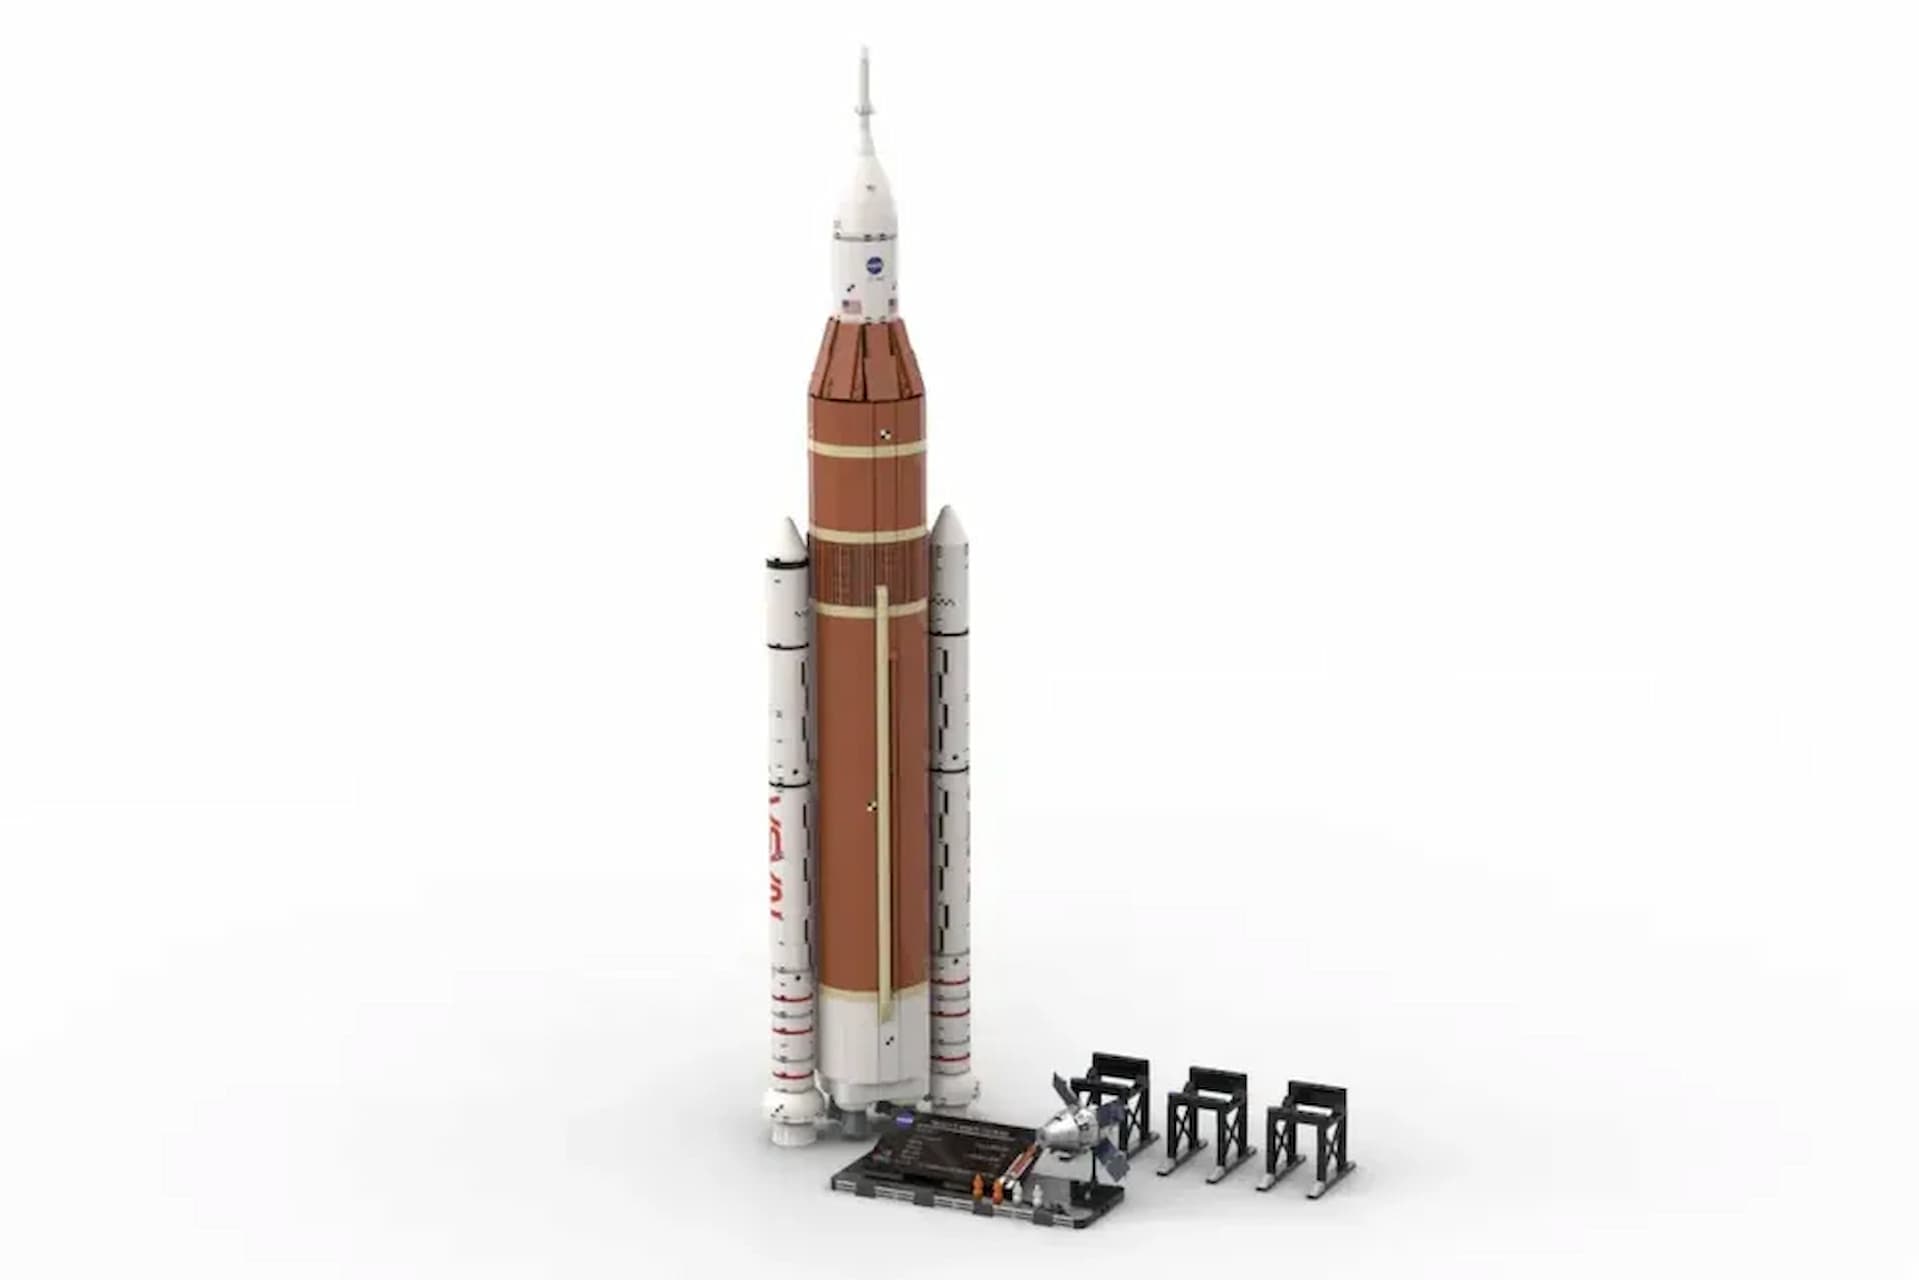 Concept images of the Lego Ideas submission, NASA SLS To the Moon and Mars